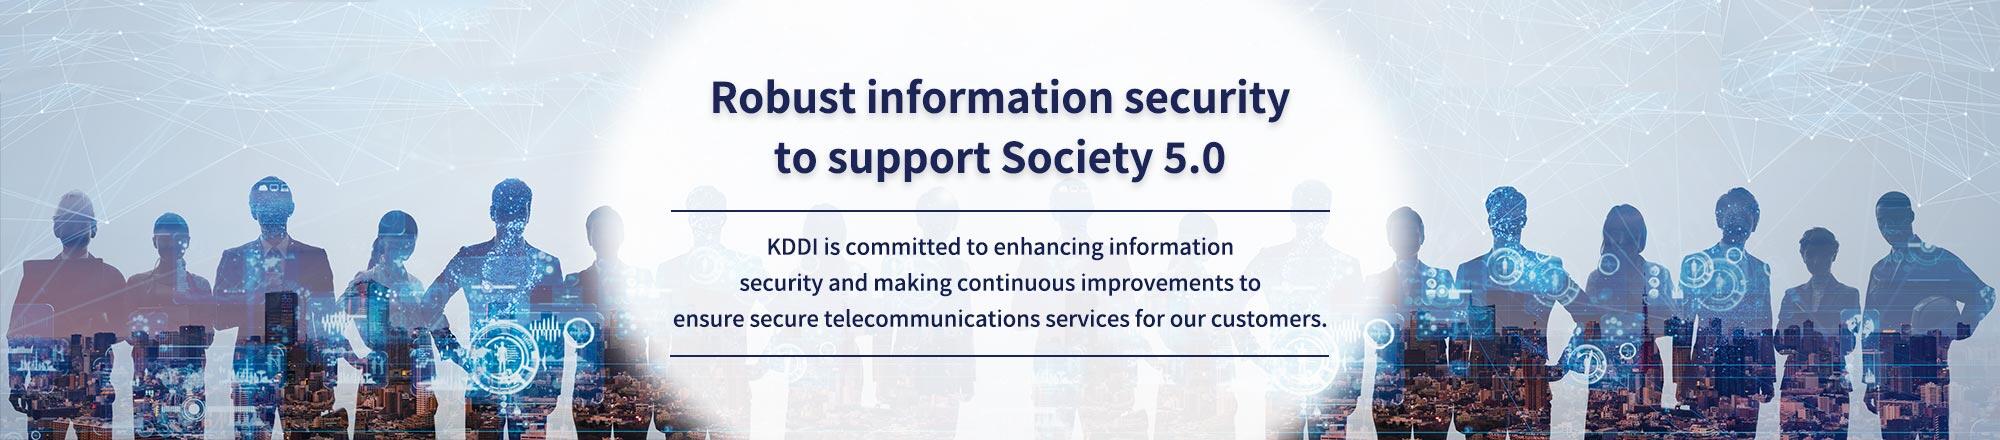 - Robust information security to support Society 5.0 - KDDI is committed to enhancing information security and making continuous improvements to ensure secure telecommunications services for our customers.